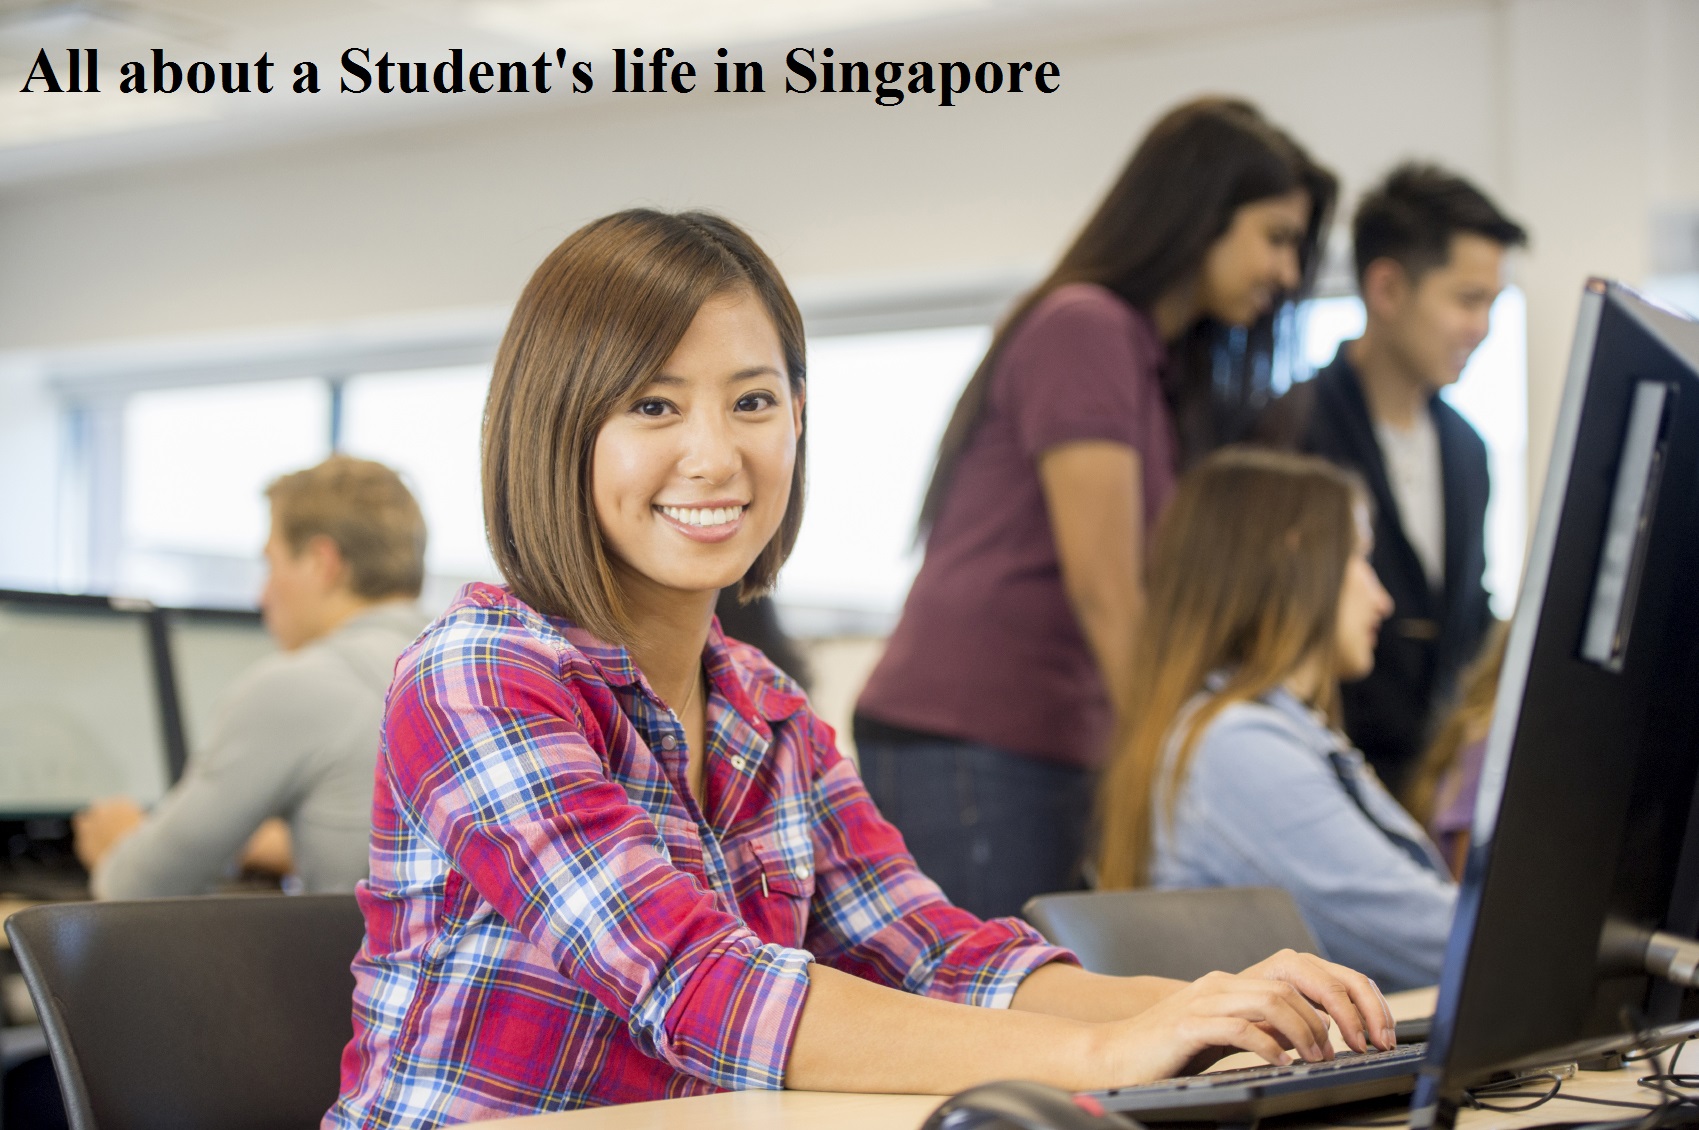 All about a Student's life in Singapore